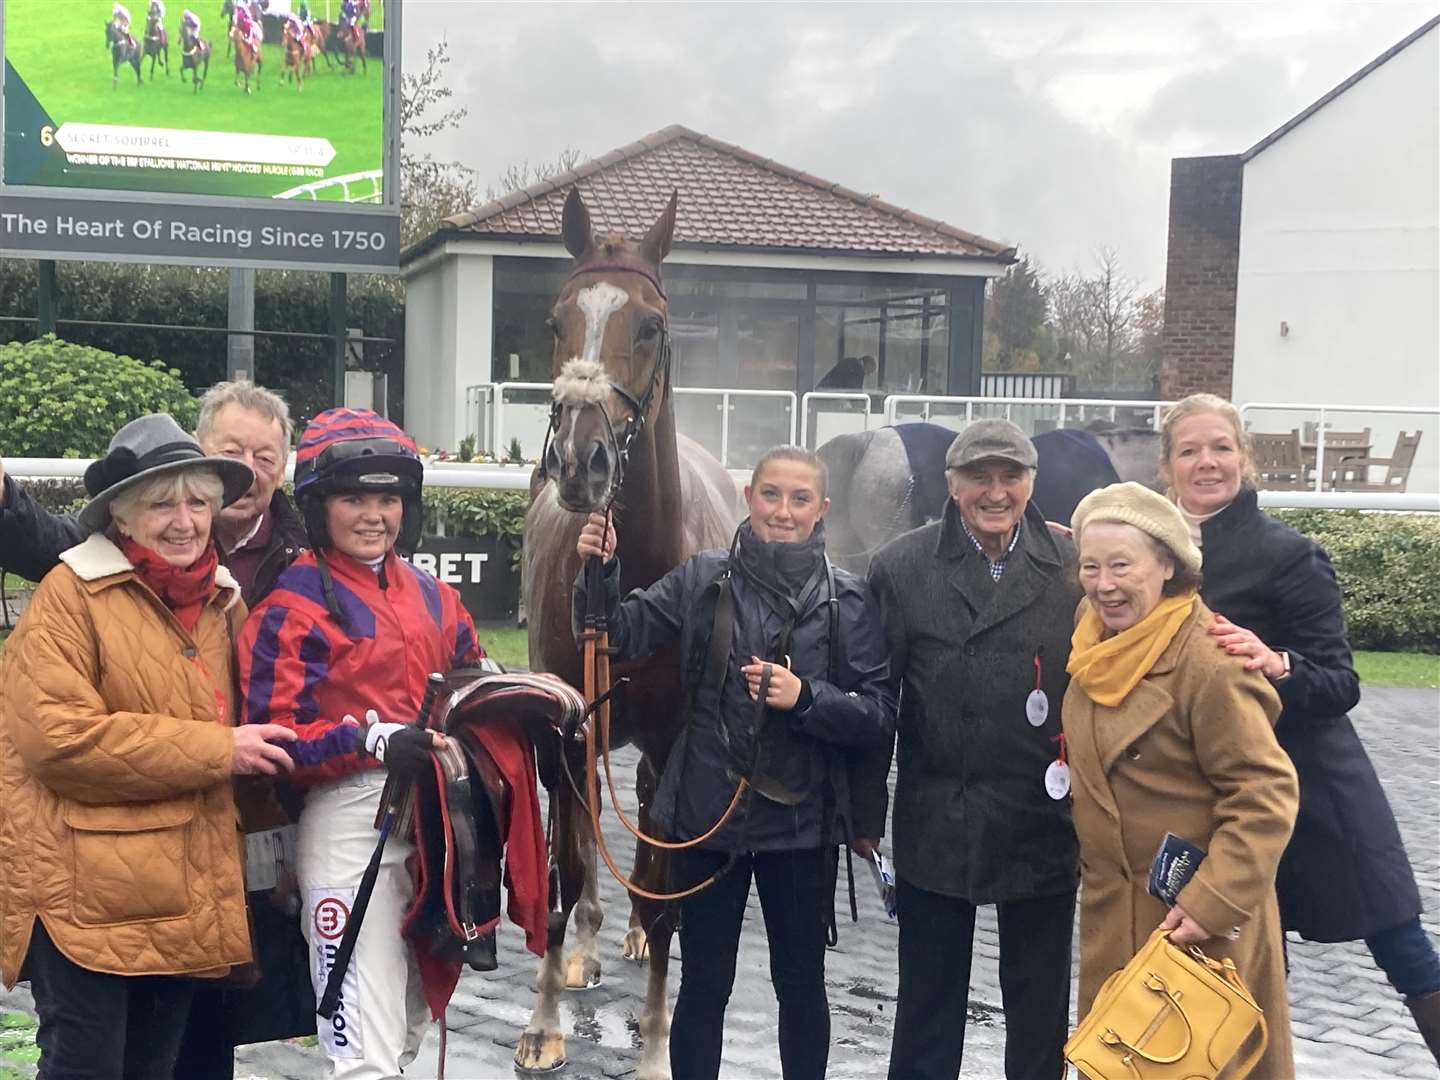 Celebrations for jockey Olive Nicholls, her mother and trainer Georgie Nicholls (far right) and the team after Thank You Ma’am’s third place at Kempton (Fiona Browne/PA)